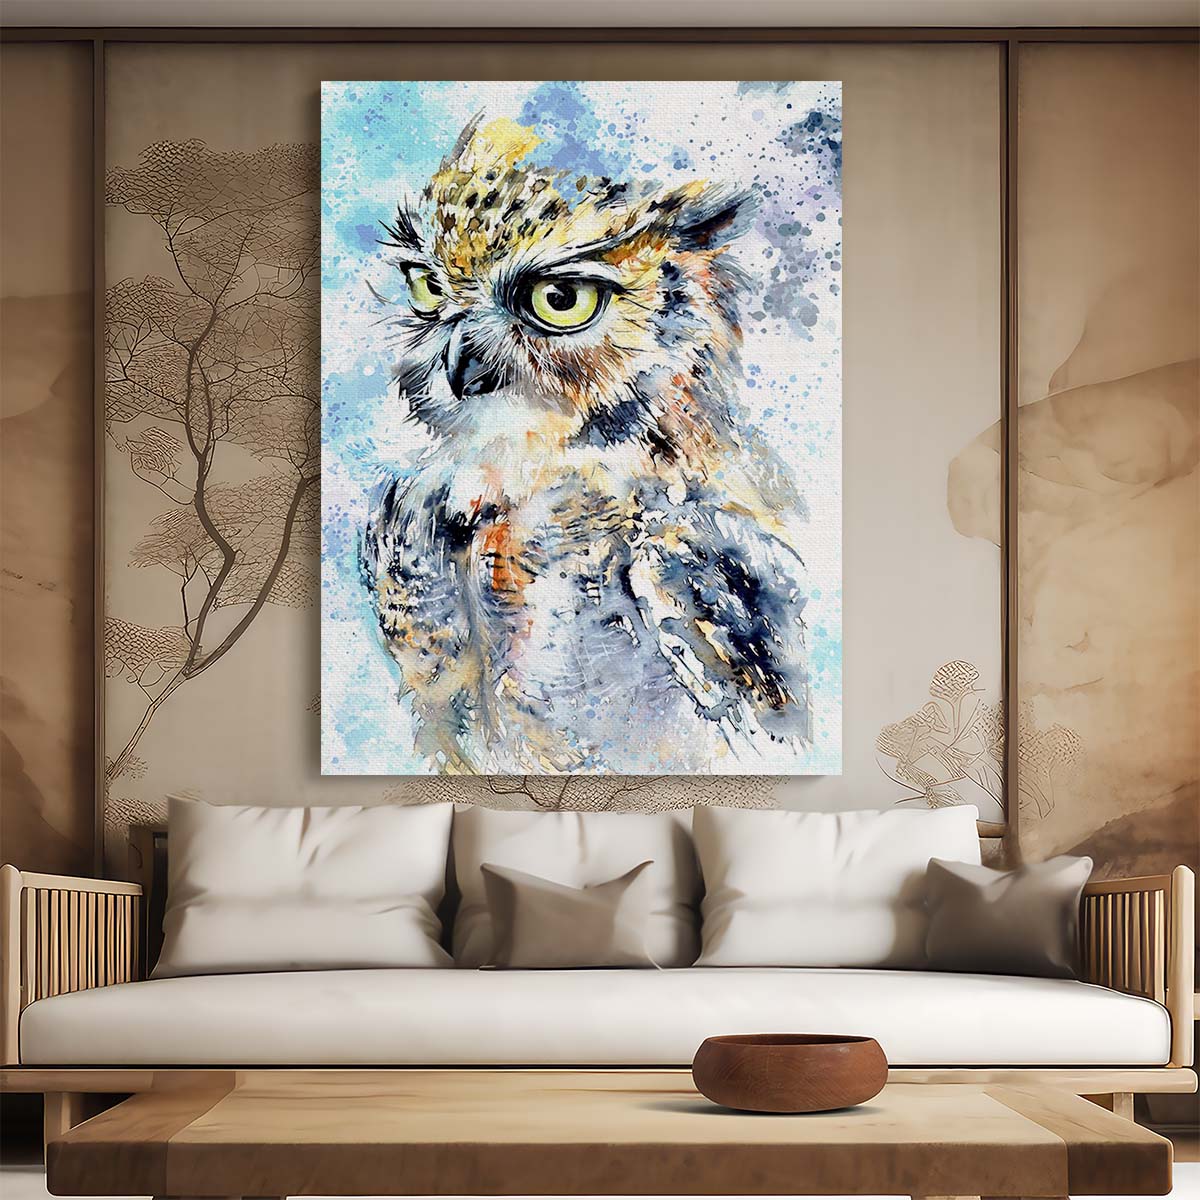 Owl Watercolor Painting Wall Art by Luxuriance Designs. Made in USA.